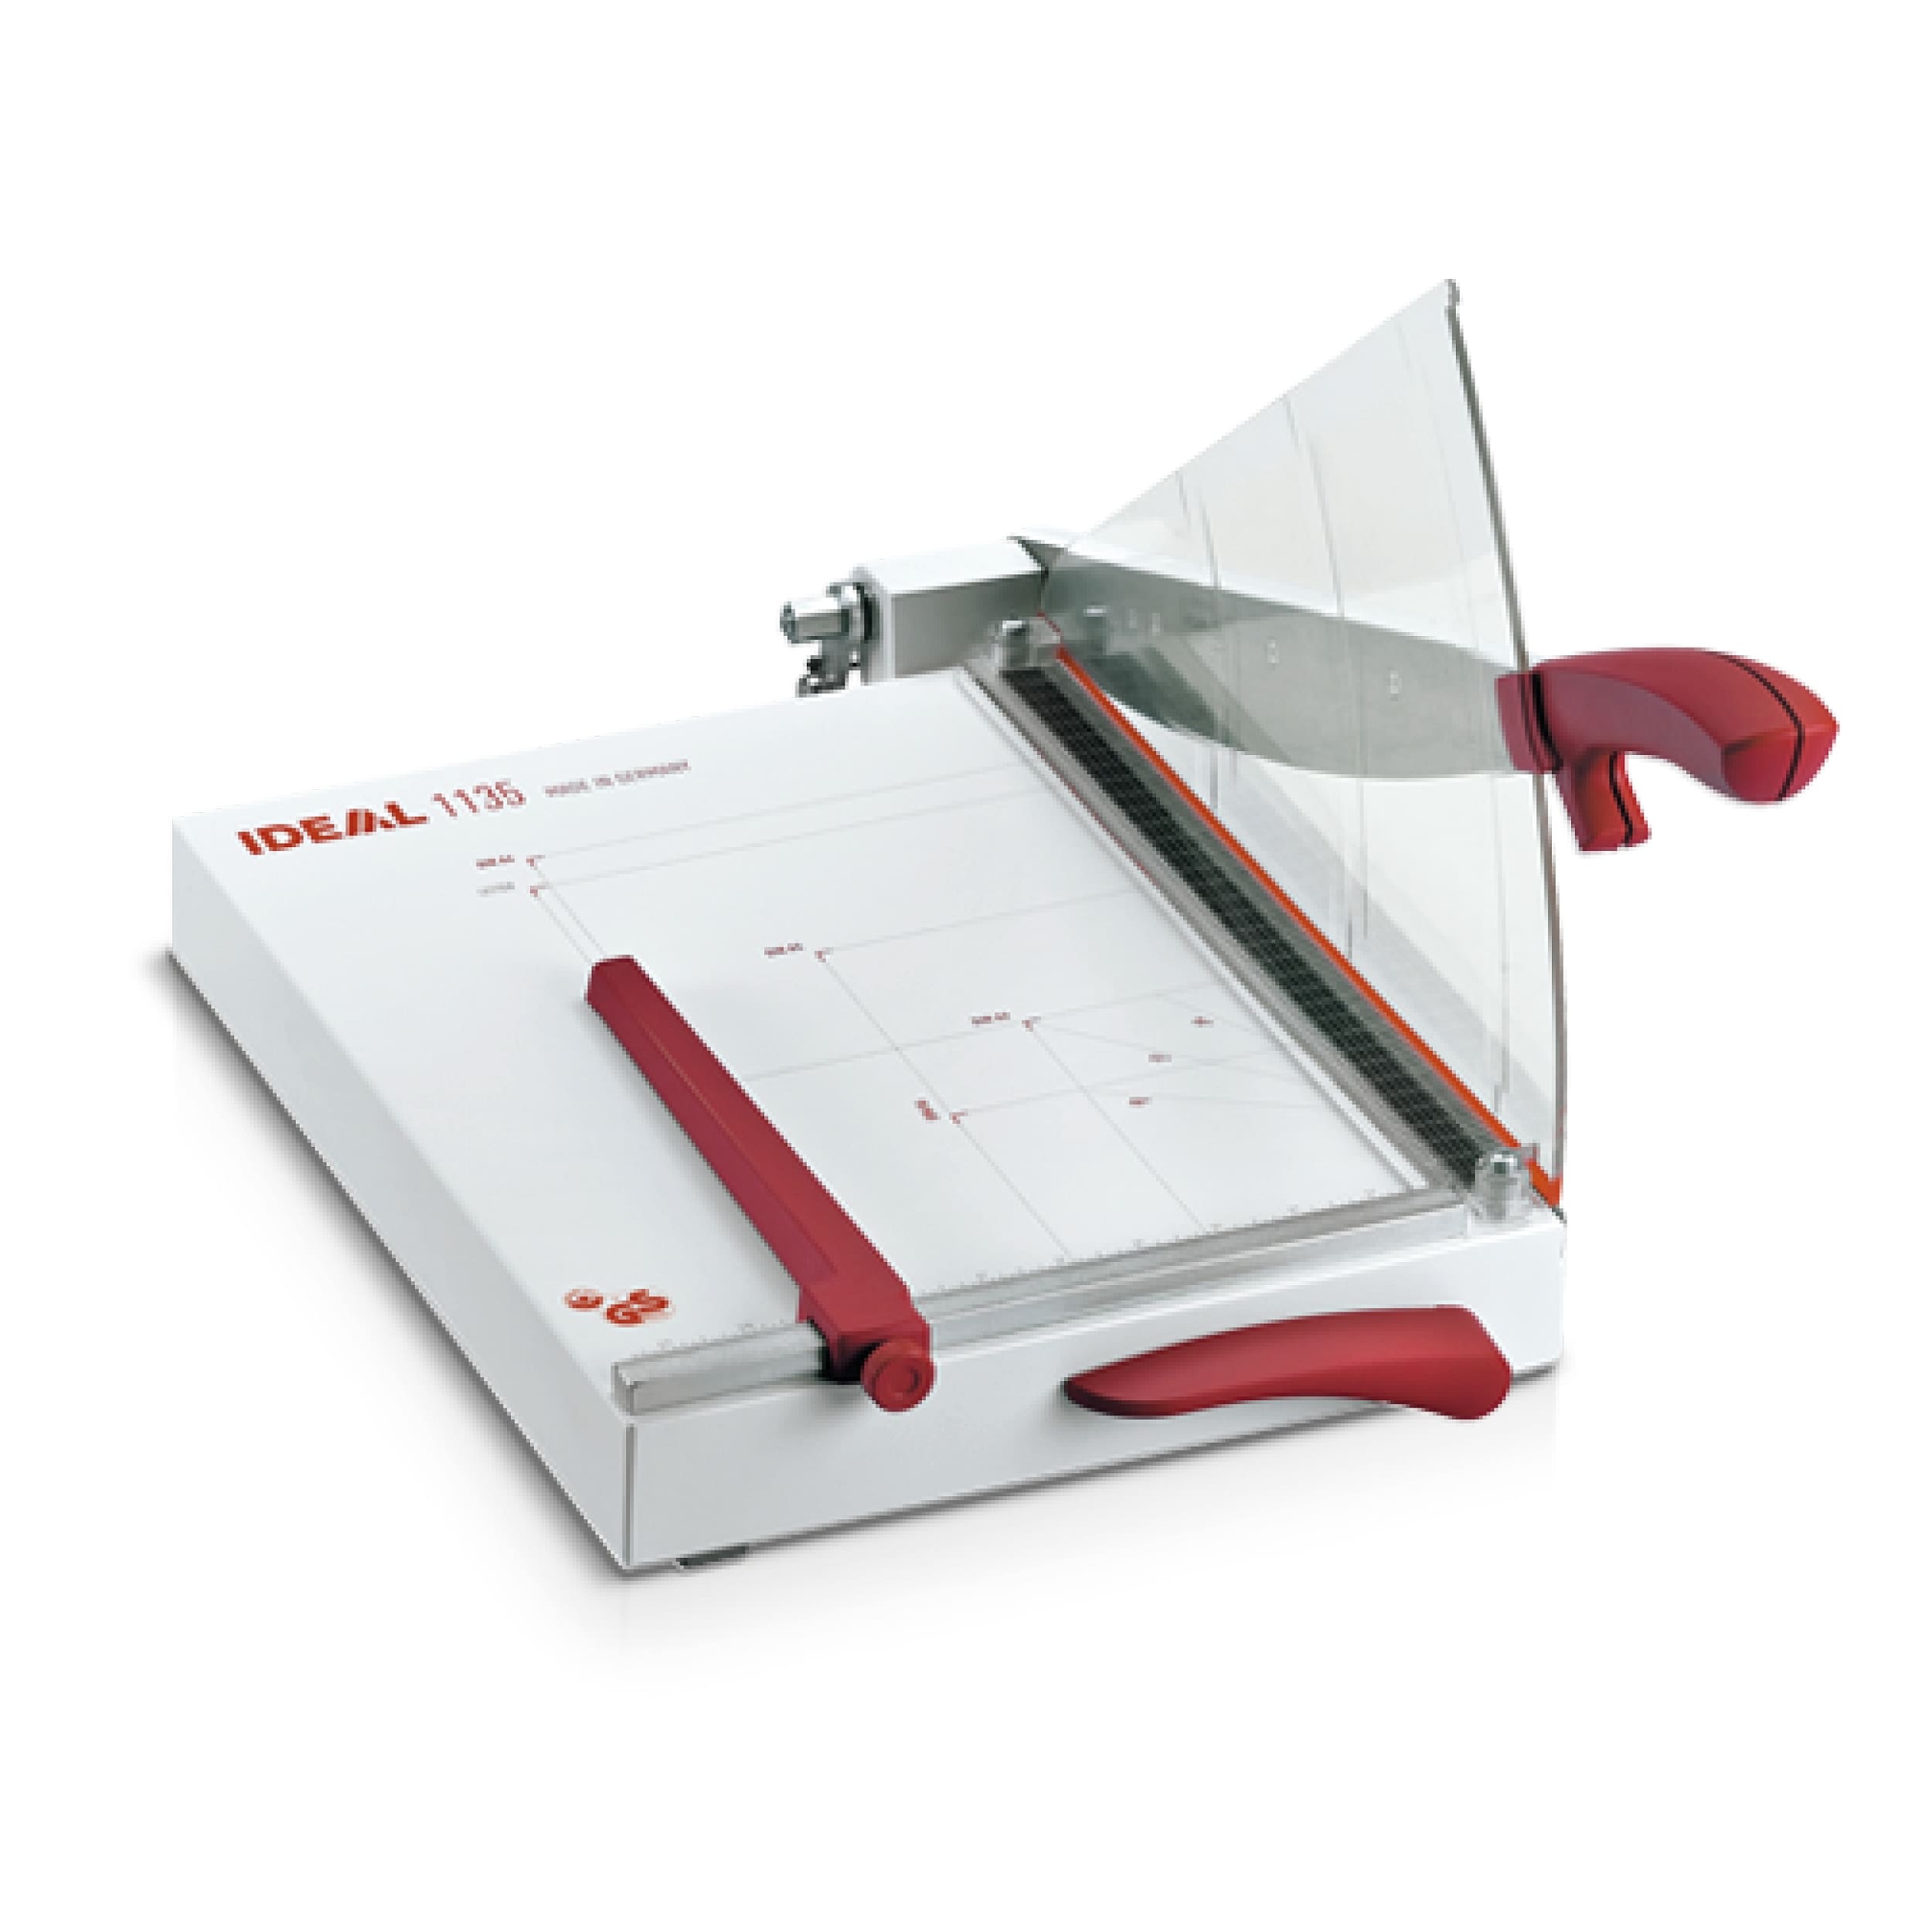 IDEAL Paper trimmer - Type IDEAL 1135 - Cutting length (in mm) 350 - zu trim paper and thin cardboard...